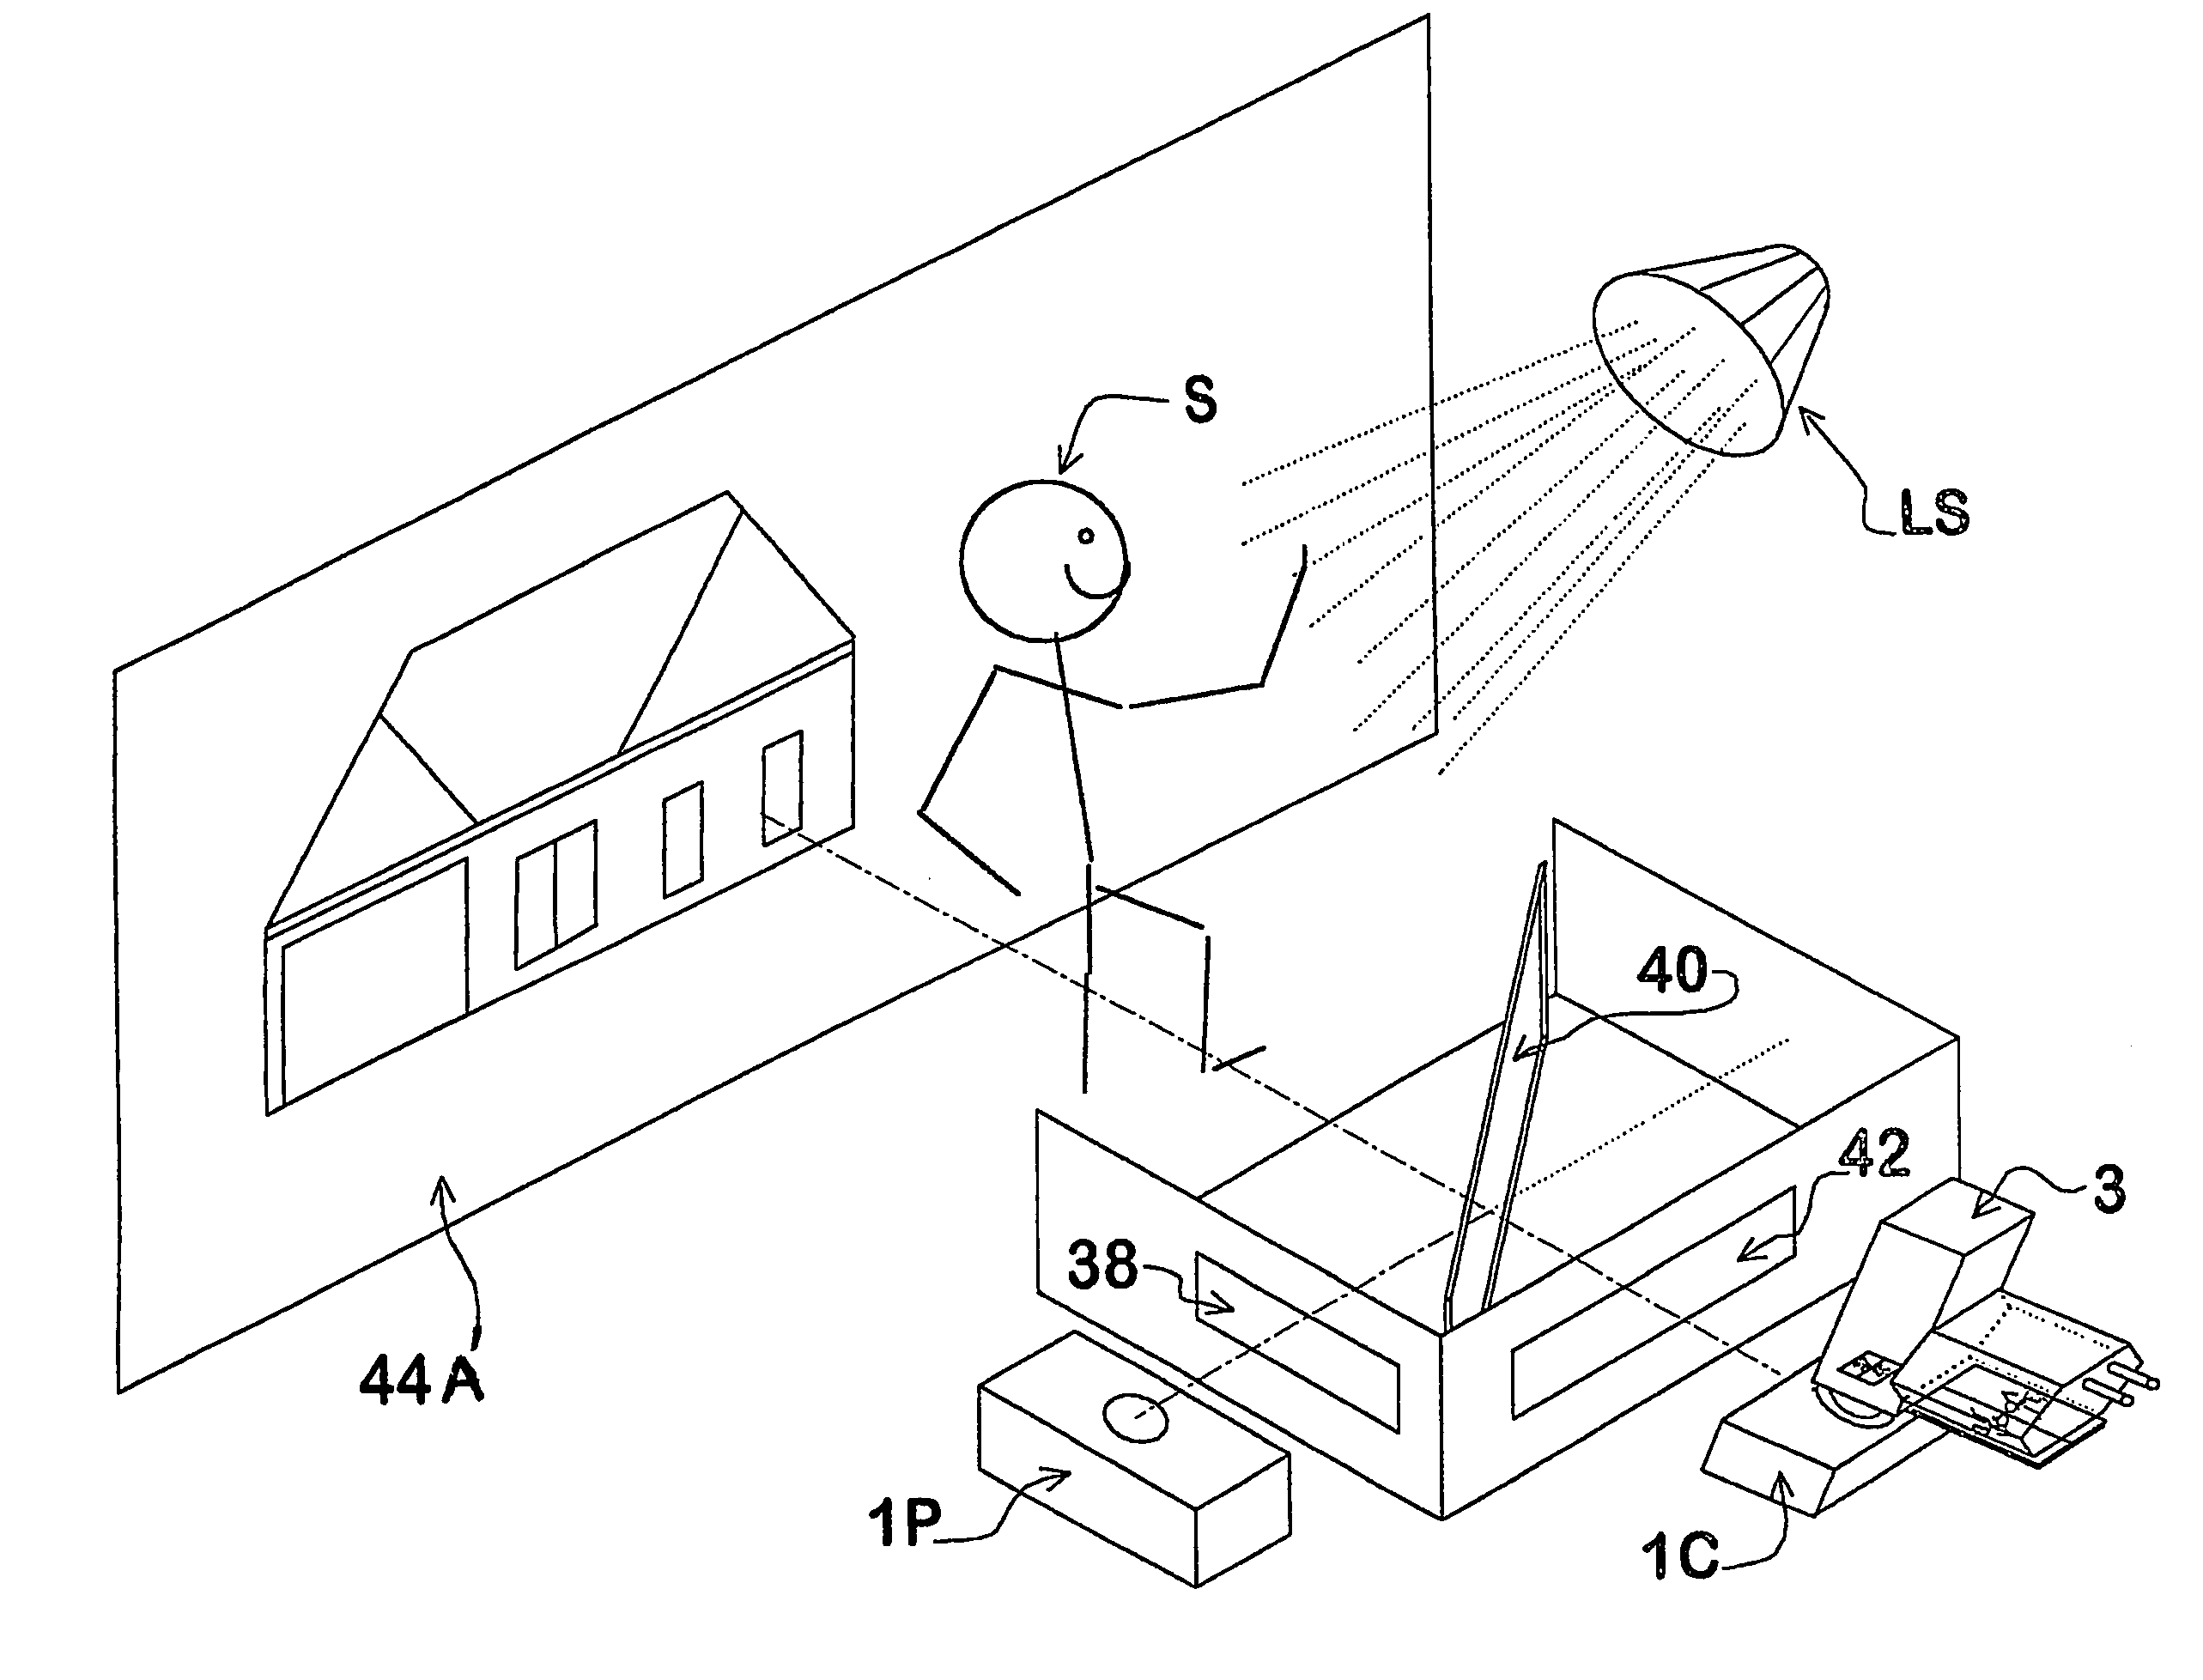 Apparatus for stereoscopic photography